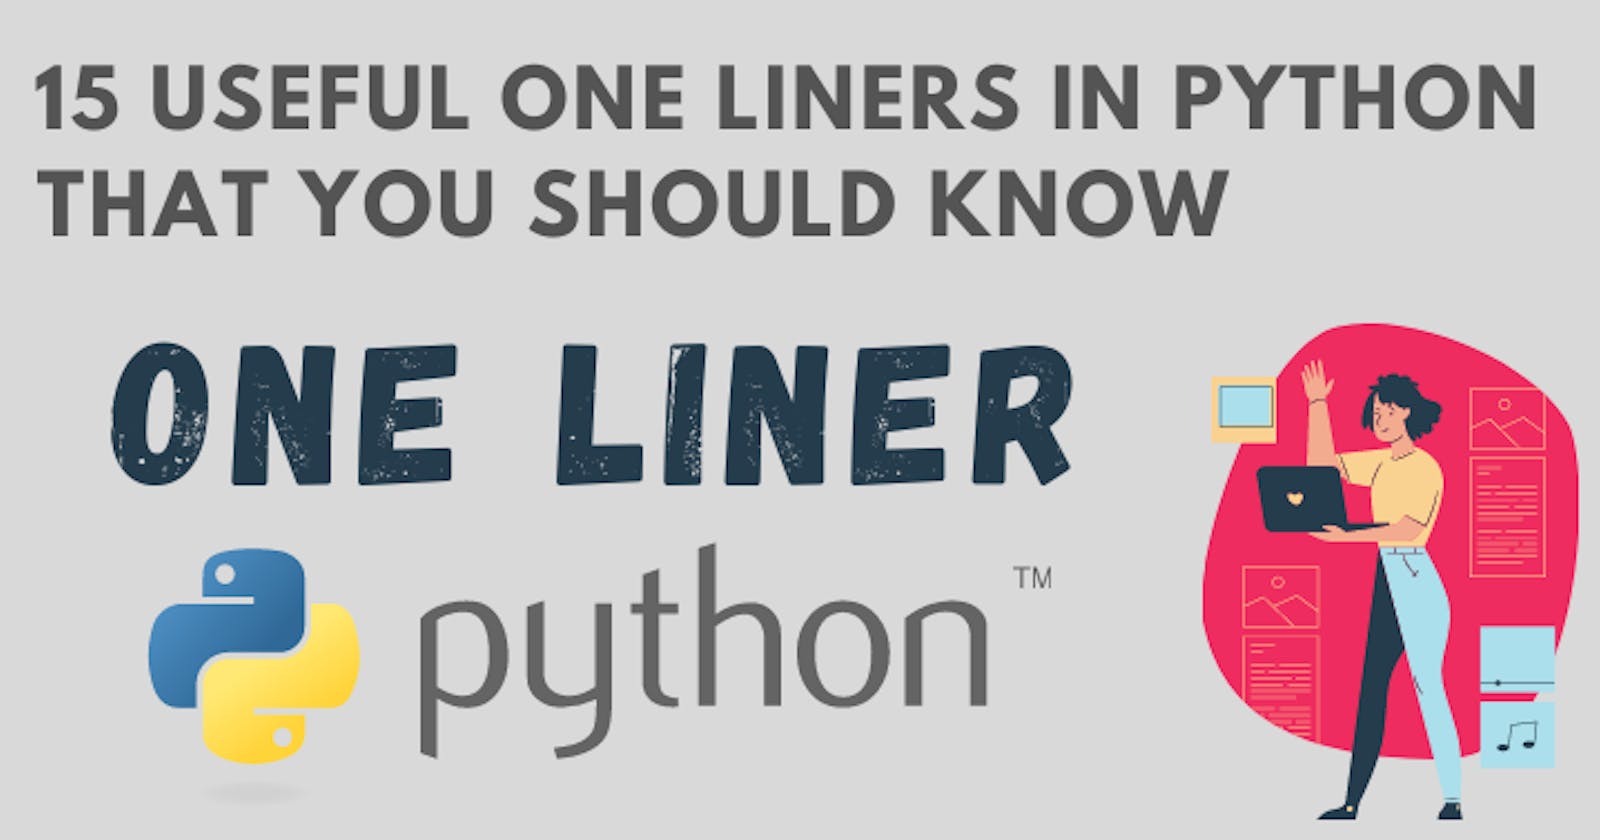 15 Useful One Liners in Python that you should know